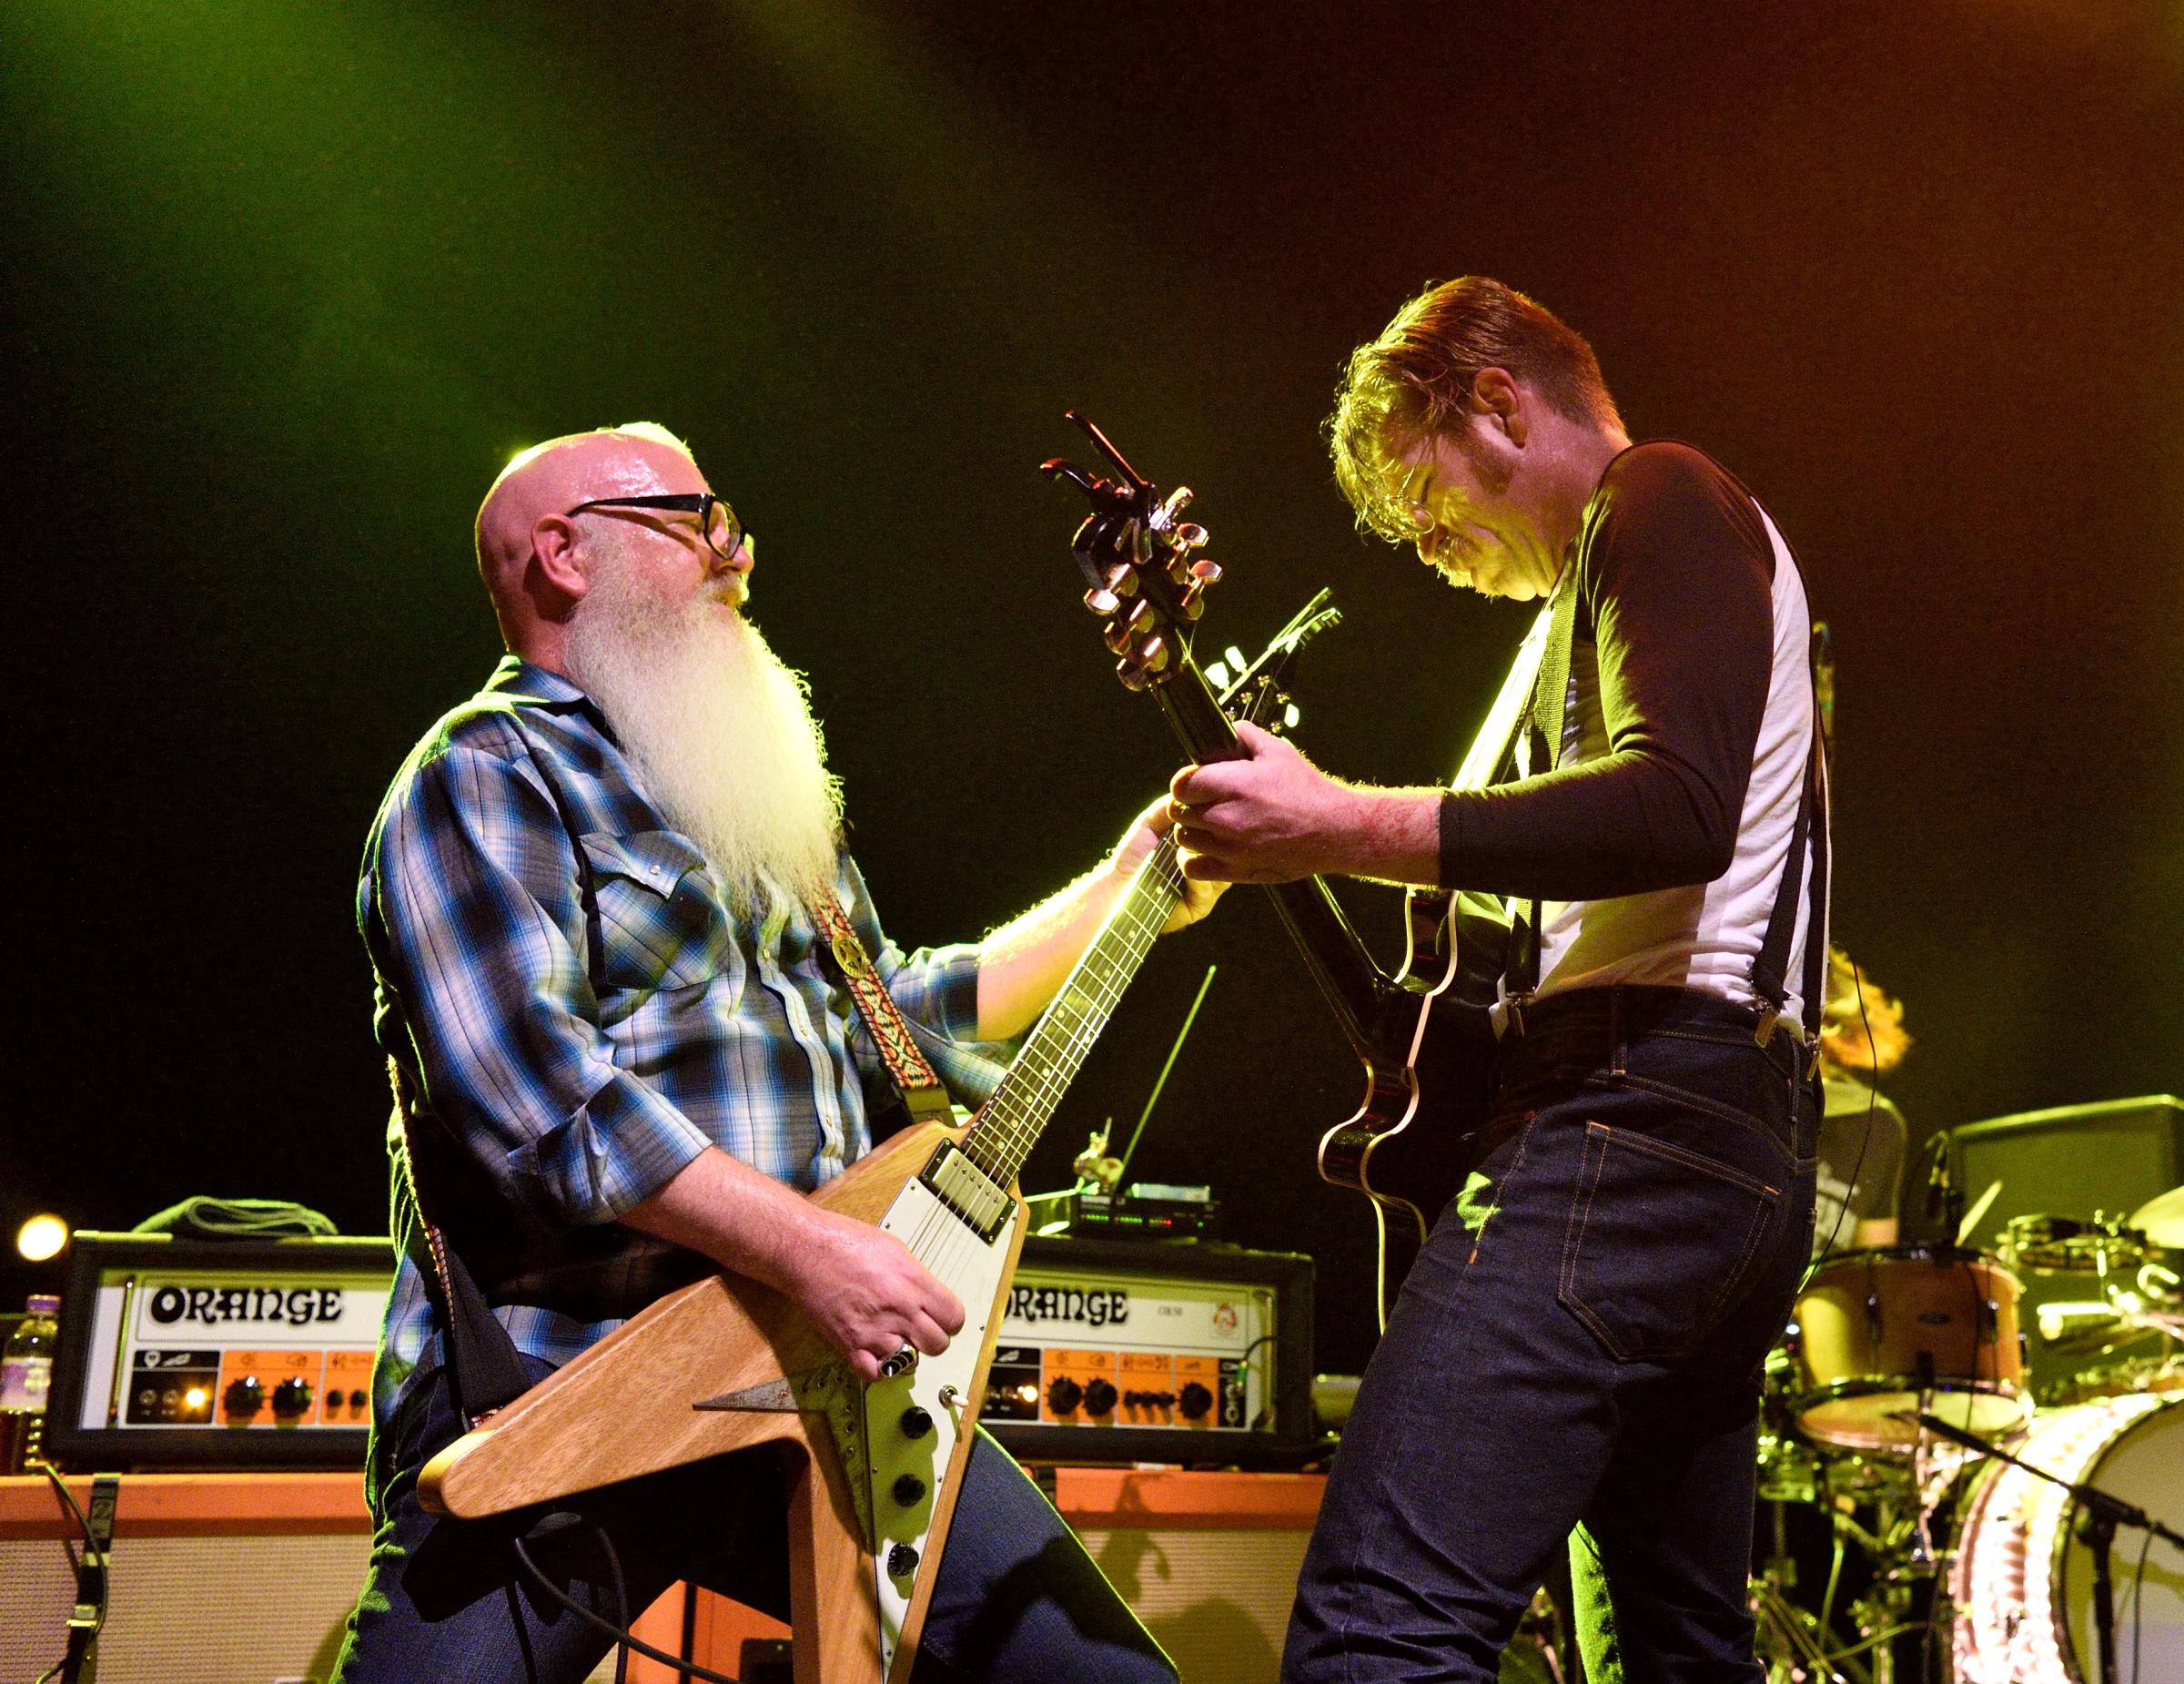 From left, Dave Catching and Jesse Hughes of Eagles of Death Metal perform at The Forum on Nov. 5, 2015 in London.